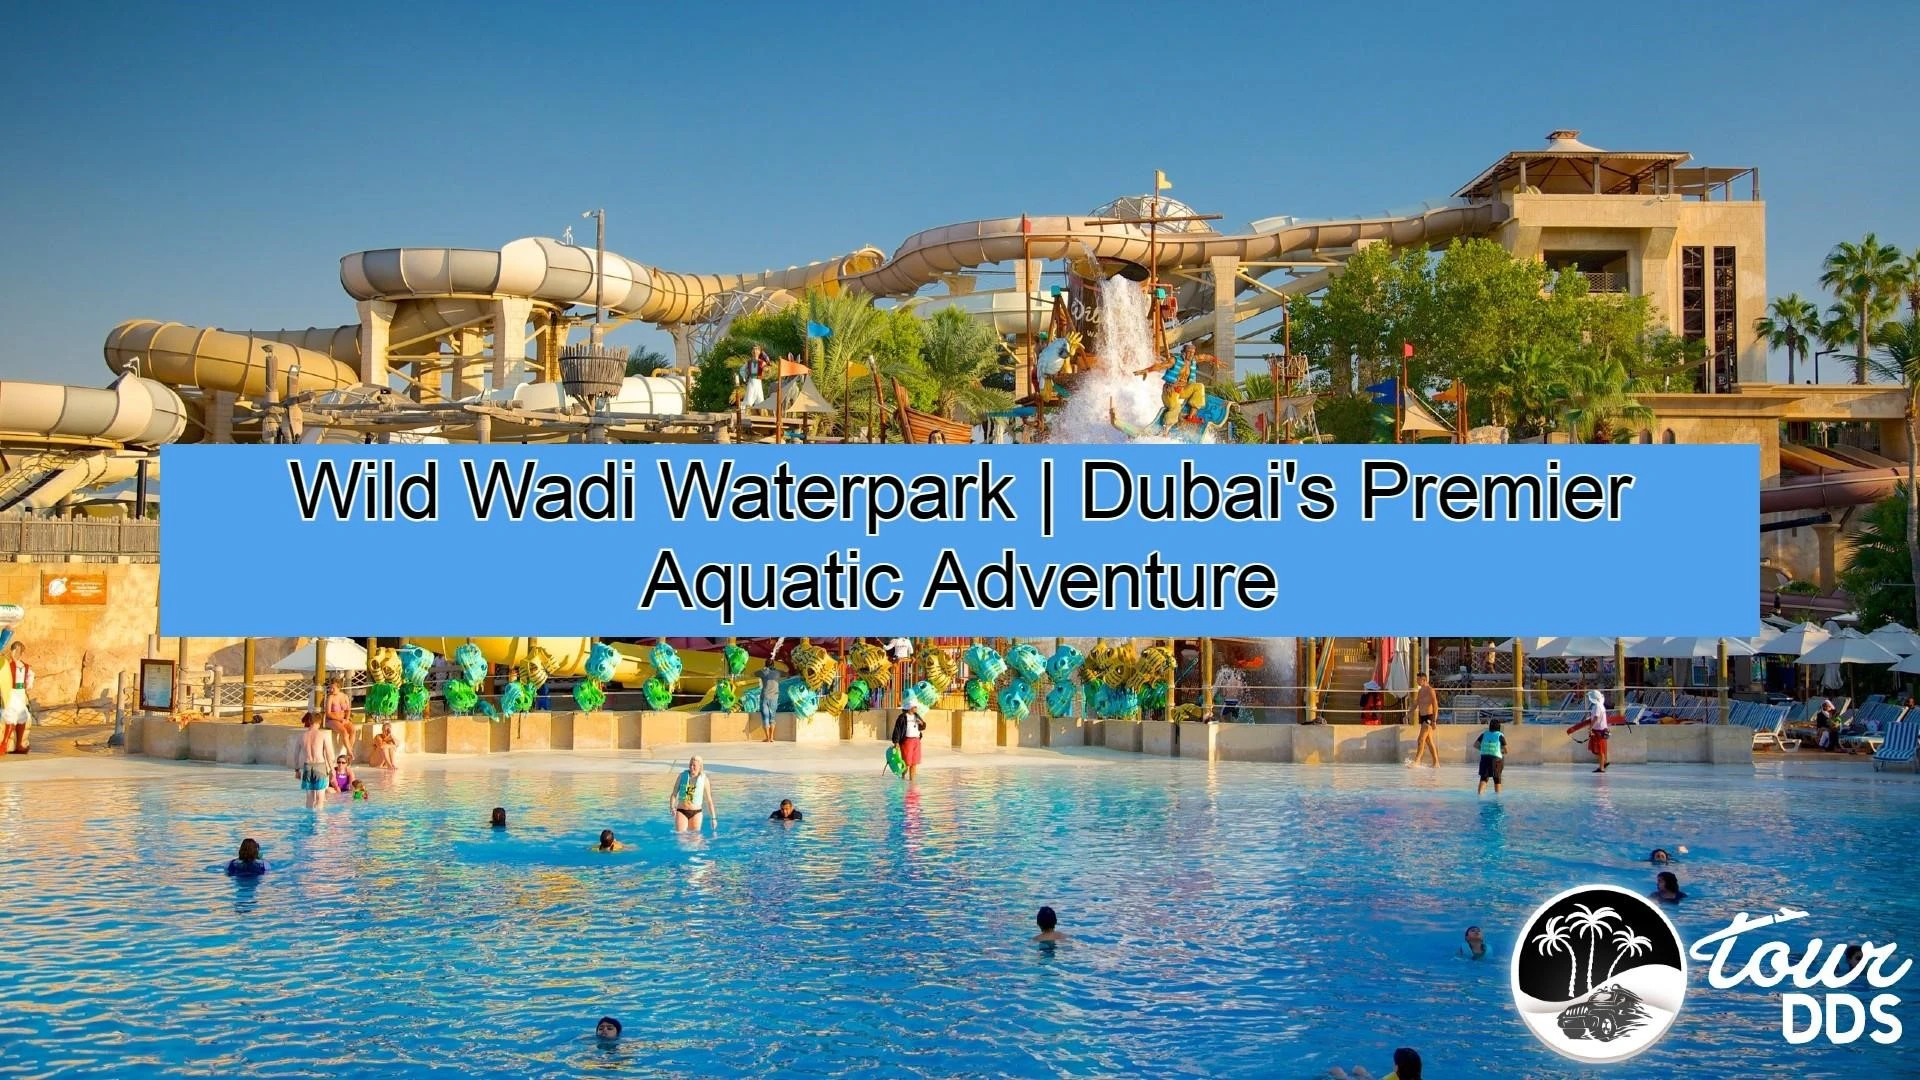 How many rides can I find at Wild Wadi?